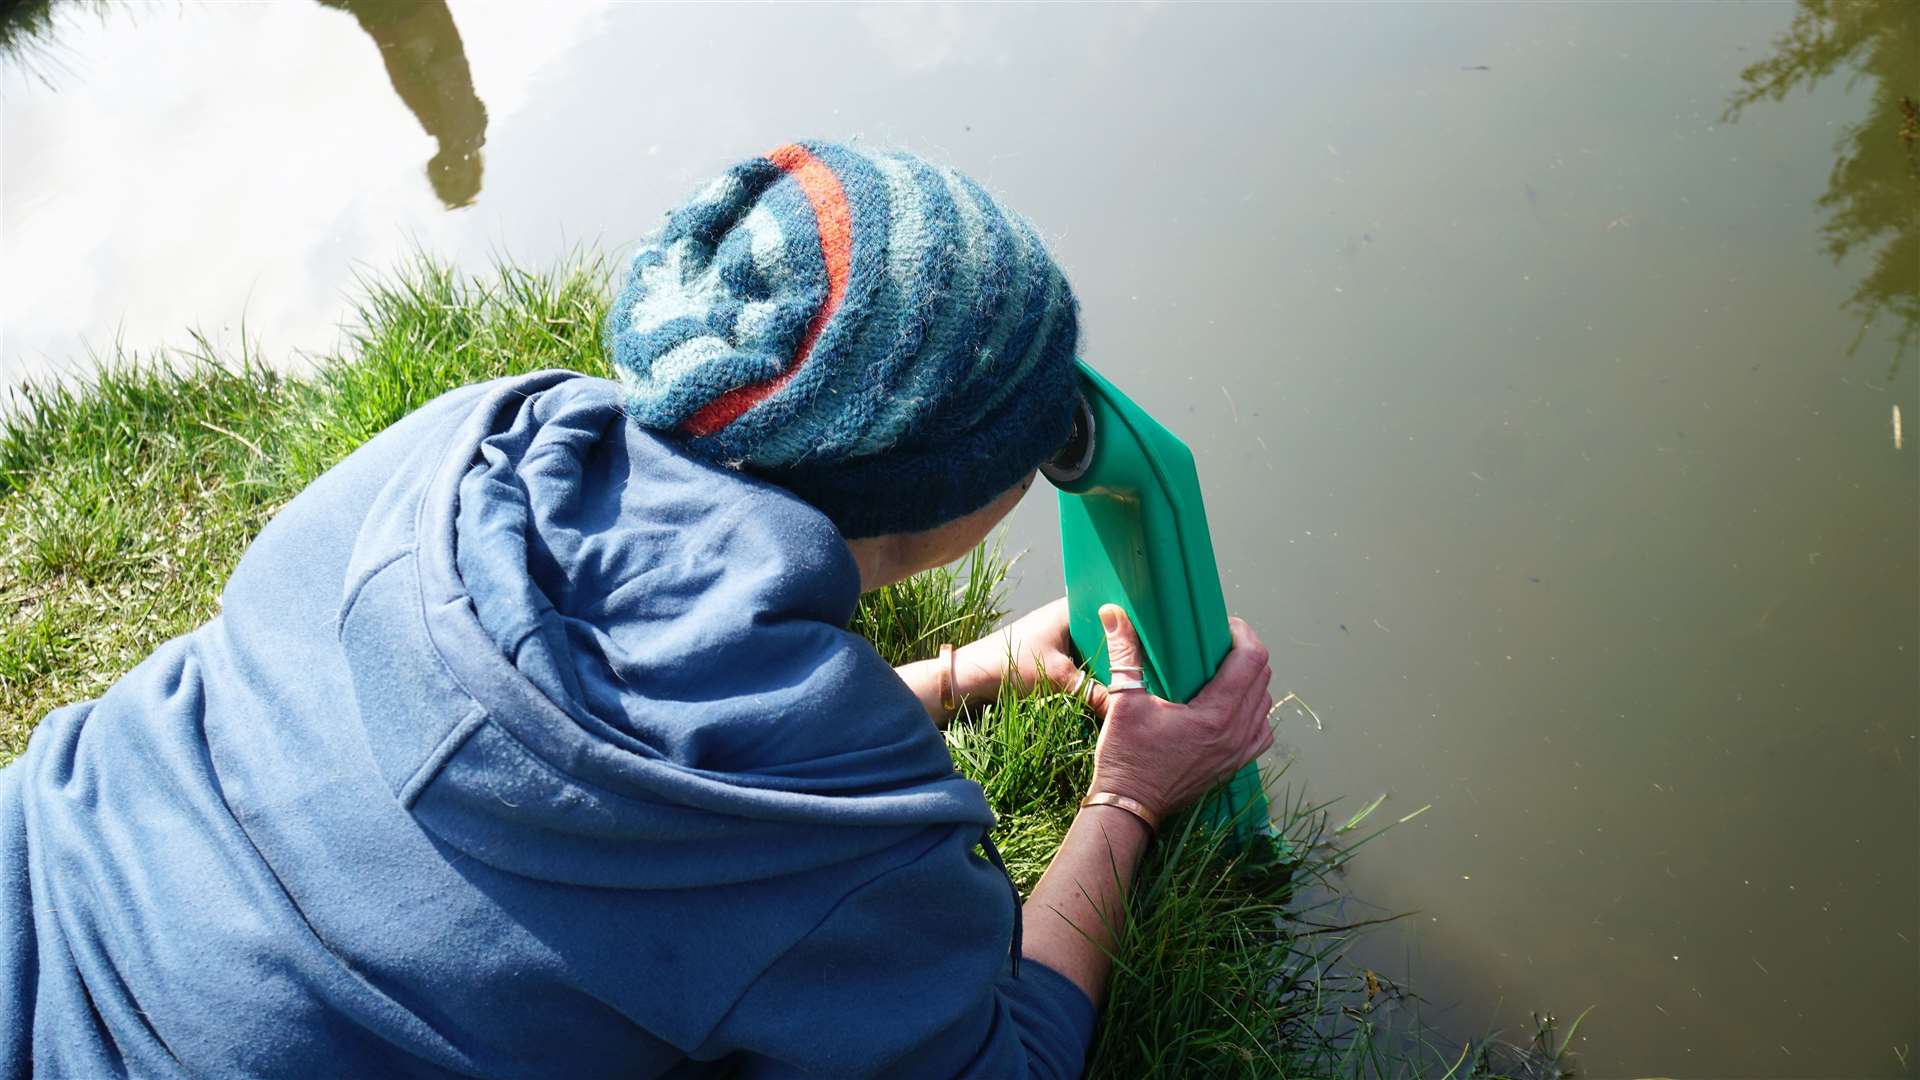 Garance uses a special device to peer into the depths of a pond at the Dunnet event and see what creatures are living there. Picture: DGS